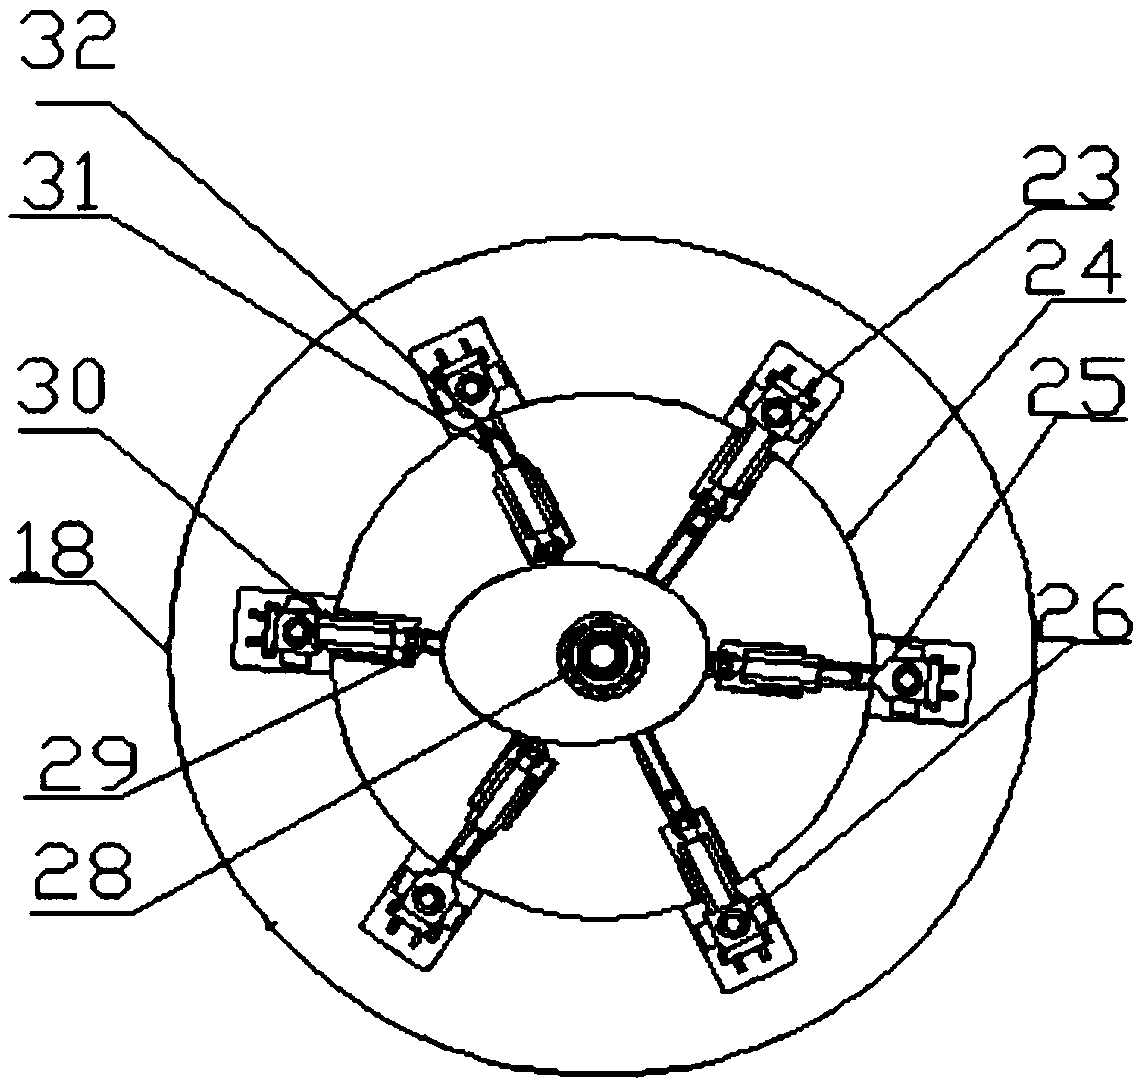 Radial cam loading and low cycle fatigue cracking equipment for split connecting rod cracking